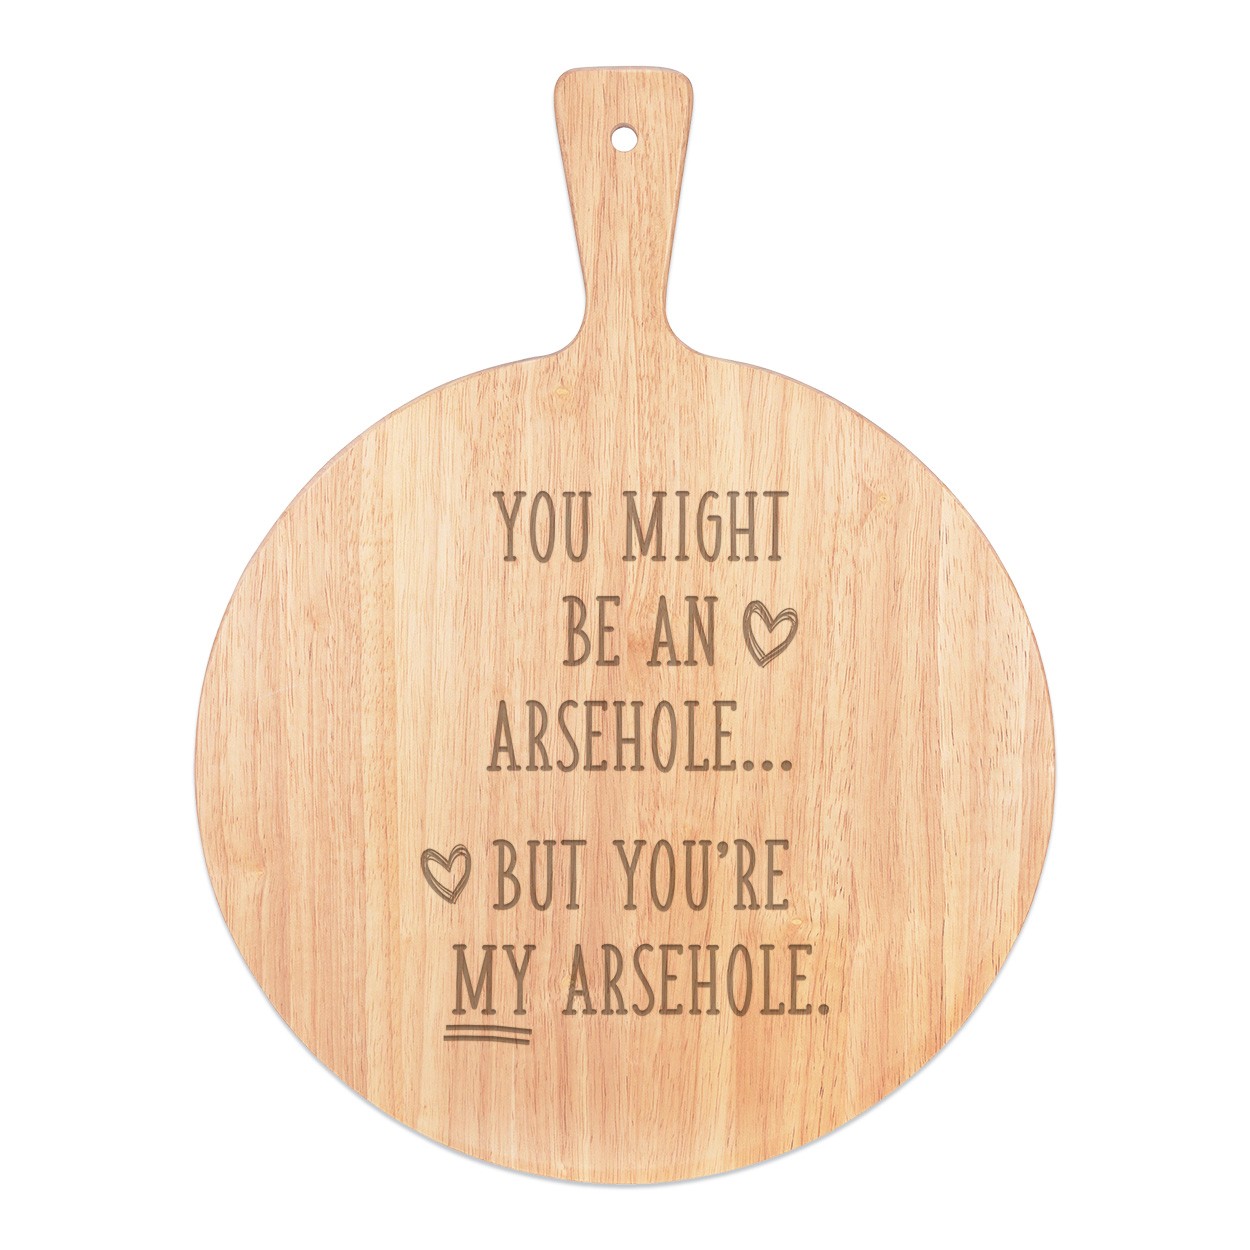 You Might Be An Ar-h-le But You're My Ar-h-le Pizza Board Paddle Serving Tray Handle Round Wooden 45x34cm